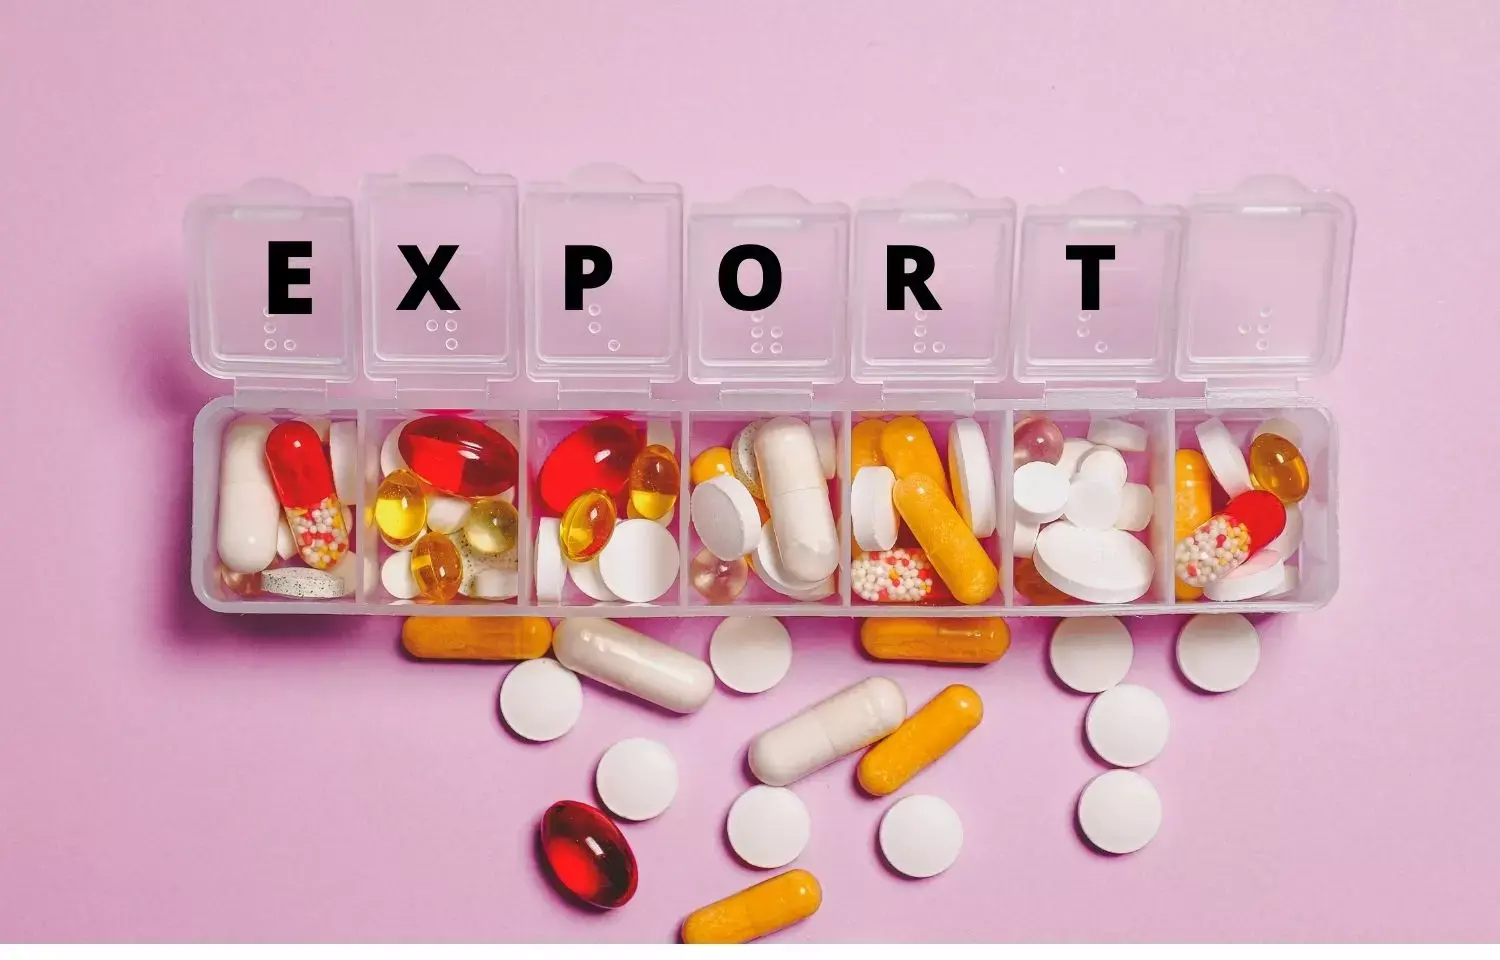 Pharma exports hit Rs 1.83 lakh crore in 2021-22: Commerce ministry